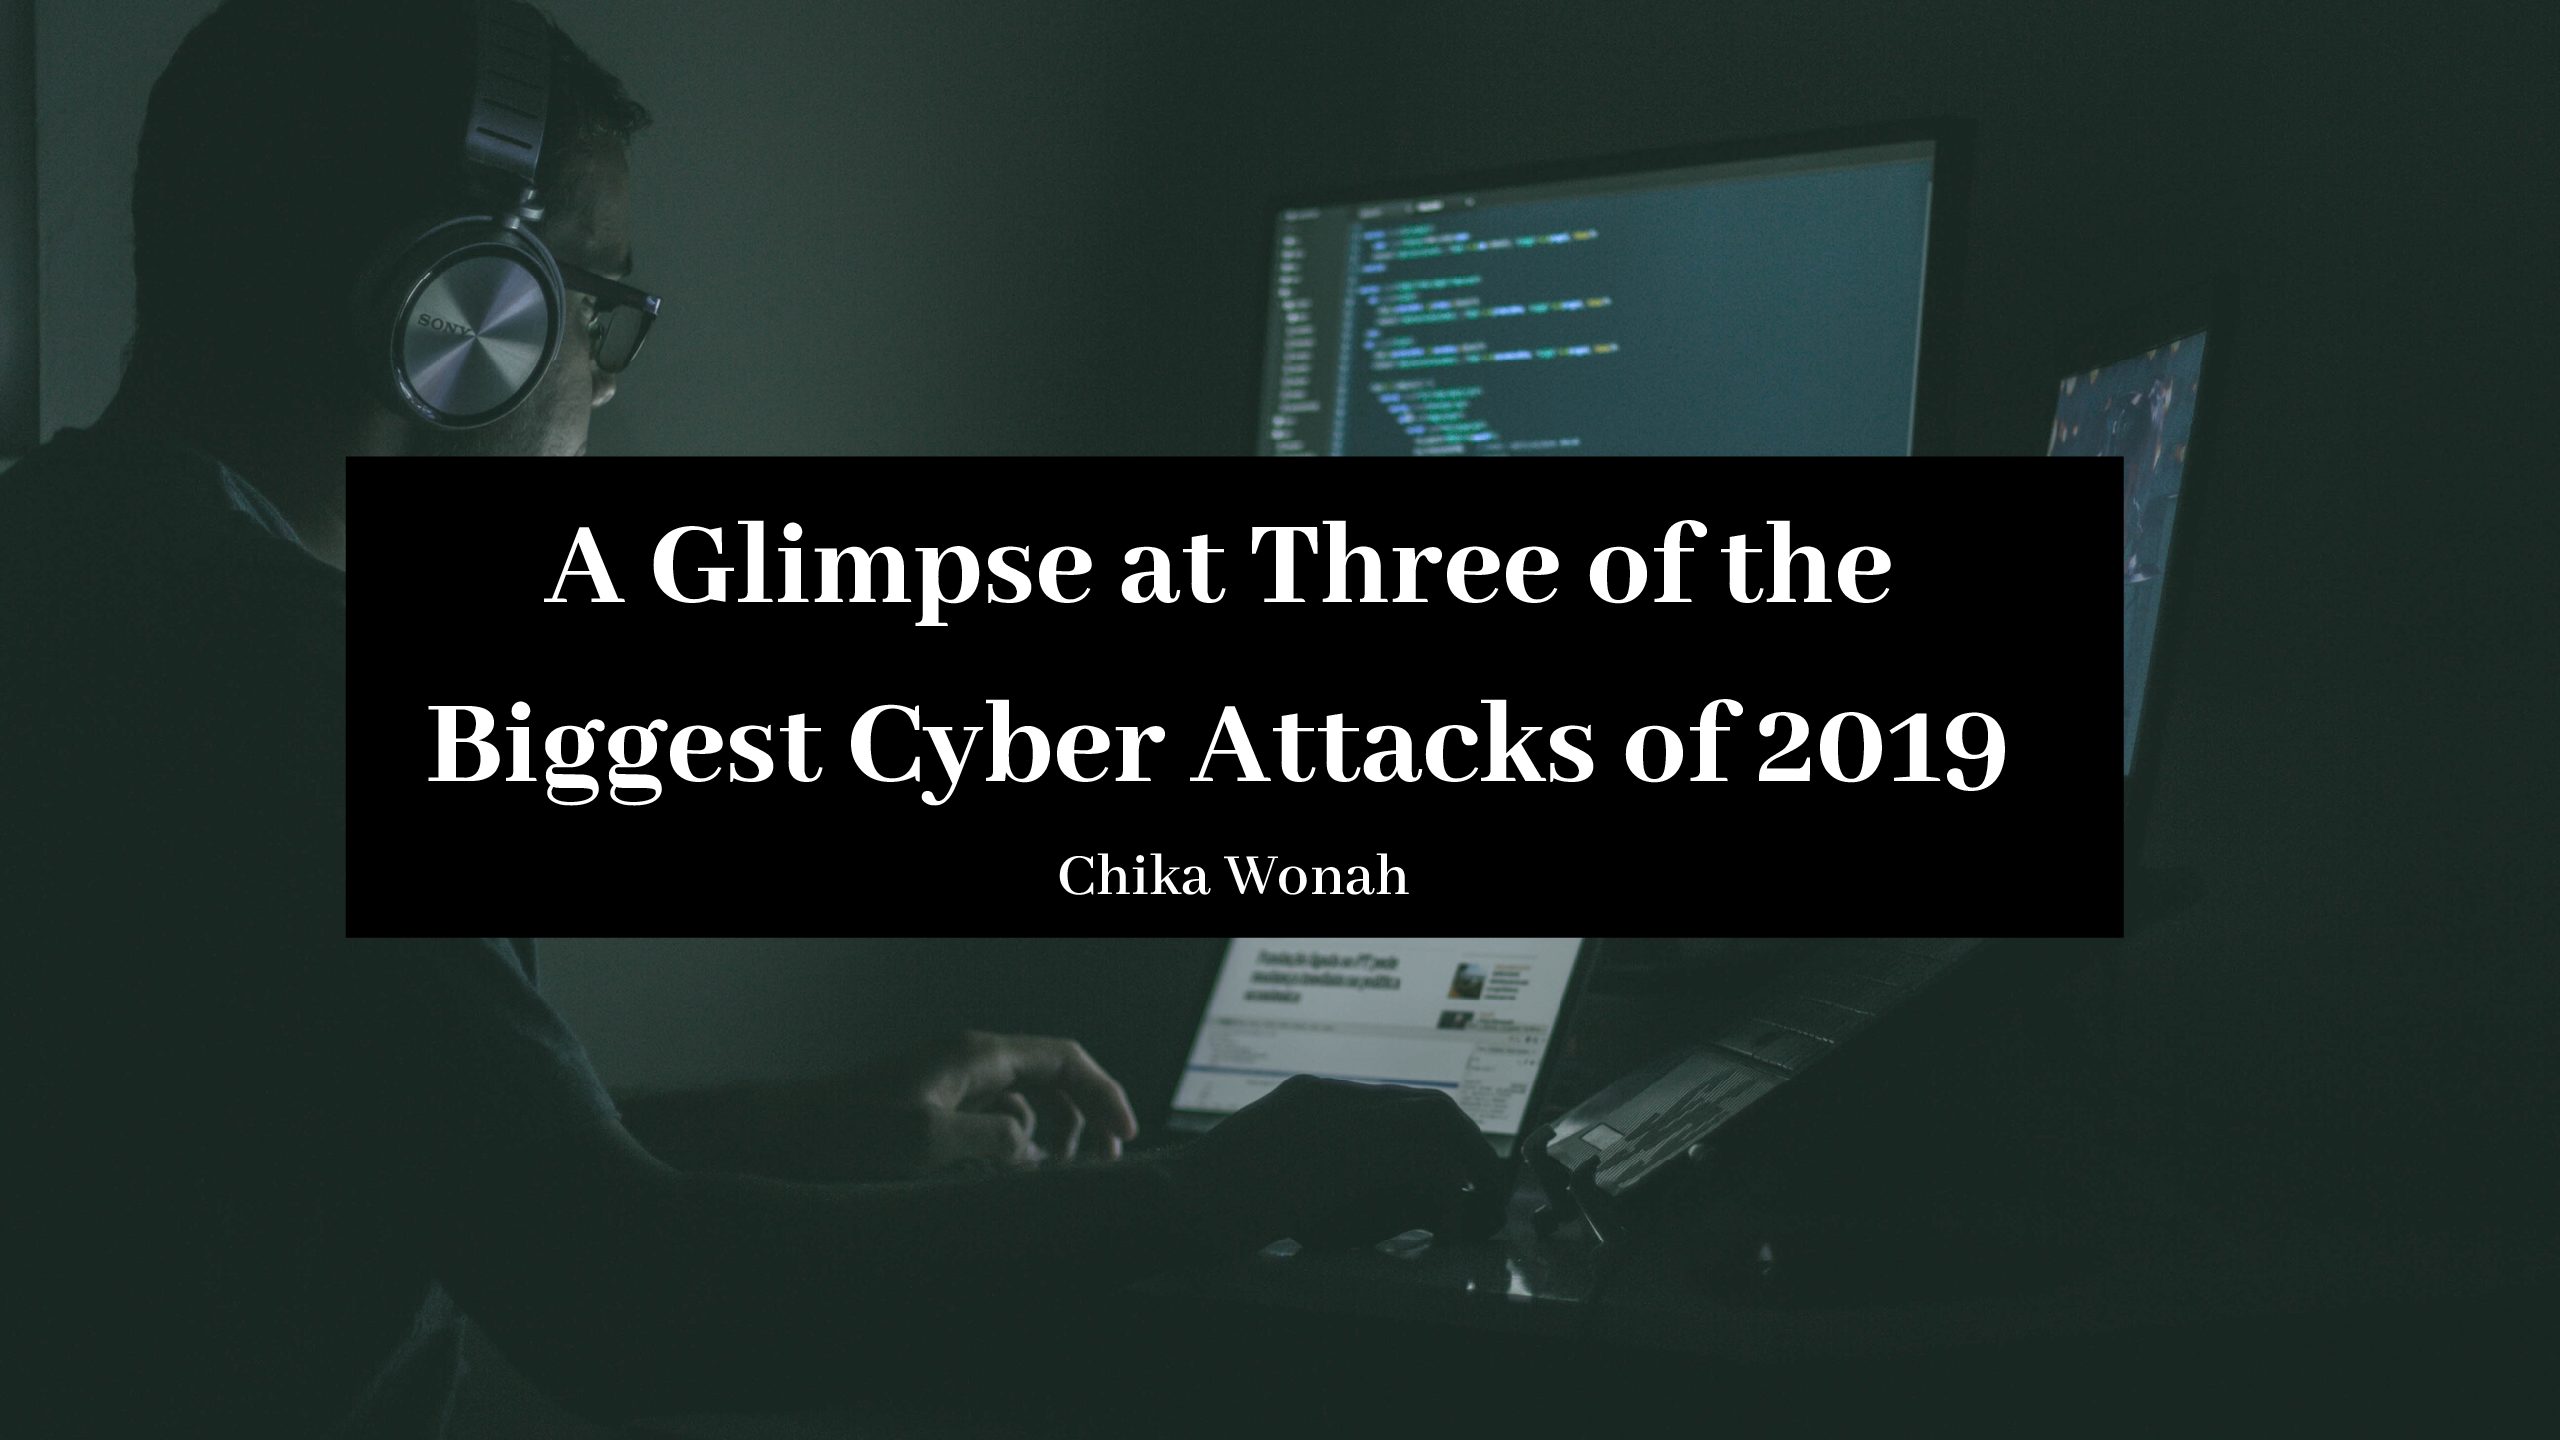 A Glimpse at Three of the Biggest Cyber Attacks of 2019